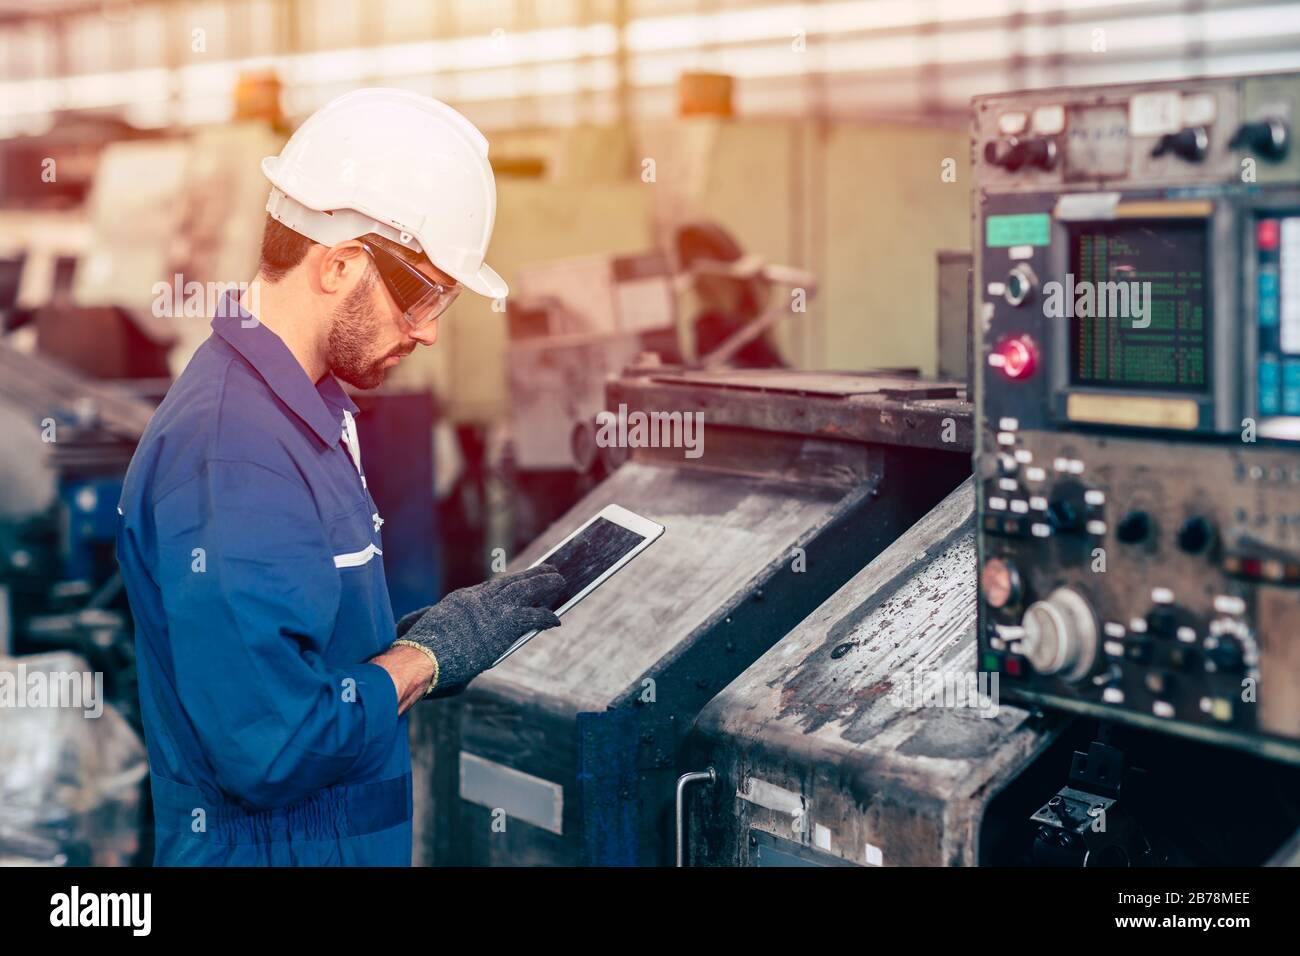 engineer setup the CNC machine with G-Code programming upload from Computer Tablet for technology in heavy industry. Stock Photo